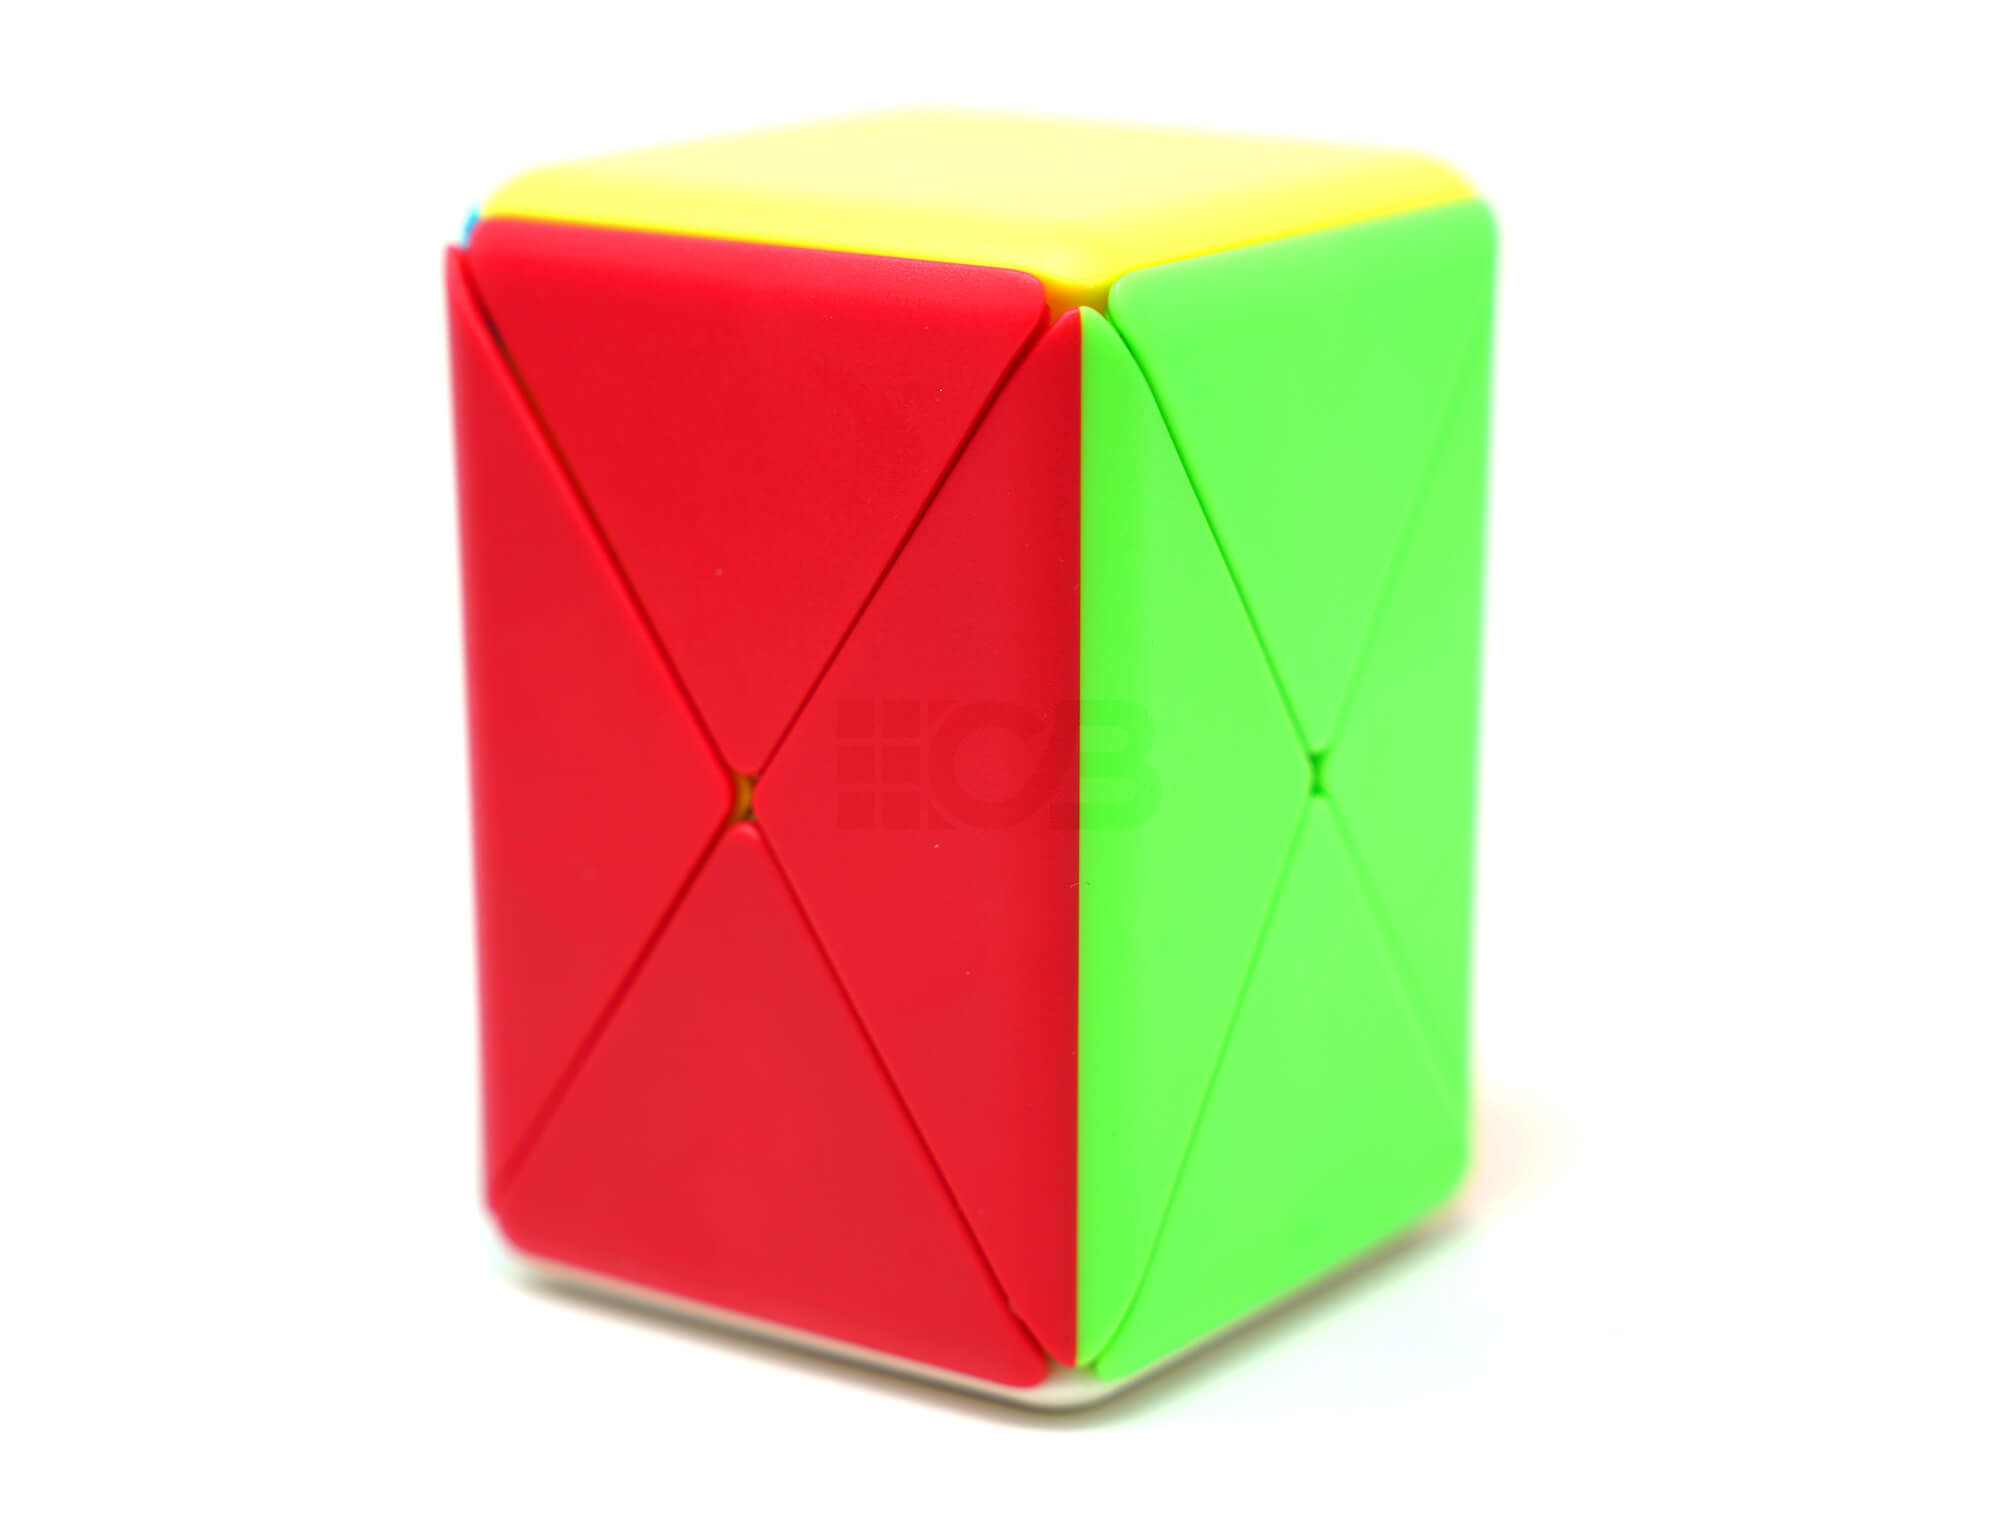 CUBO MÁGICO CUBOIDE CONTAINER FANXIN